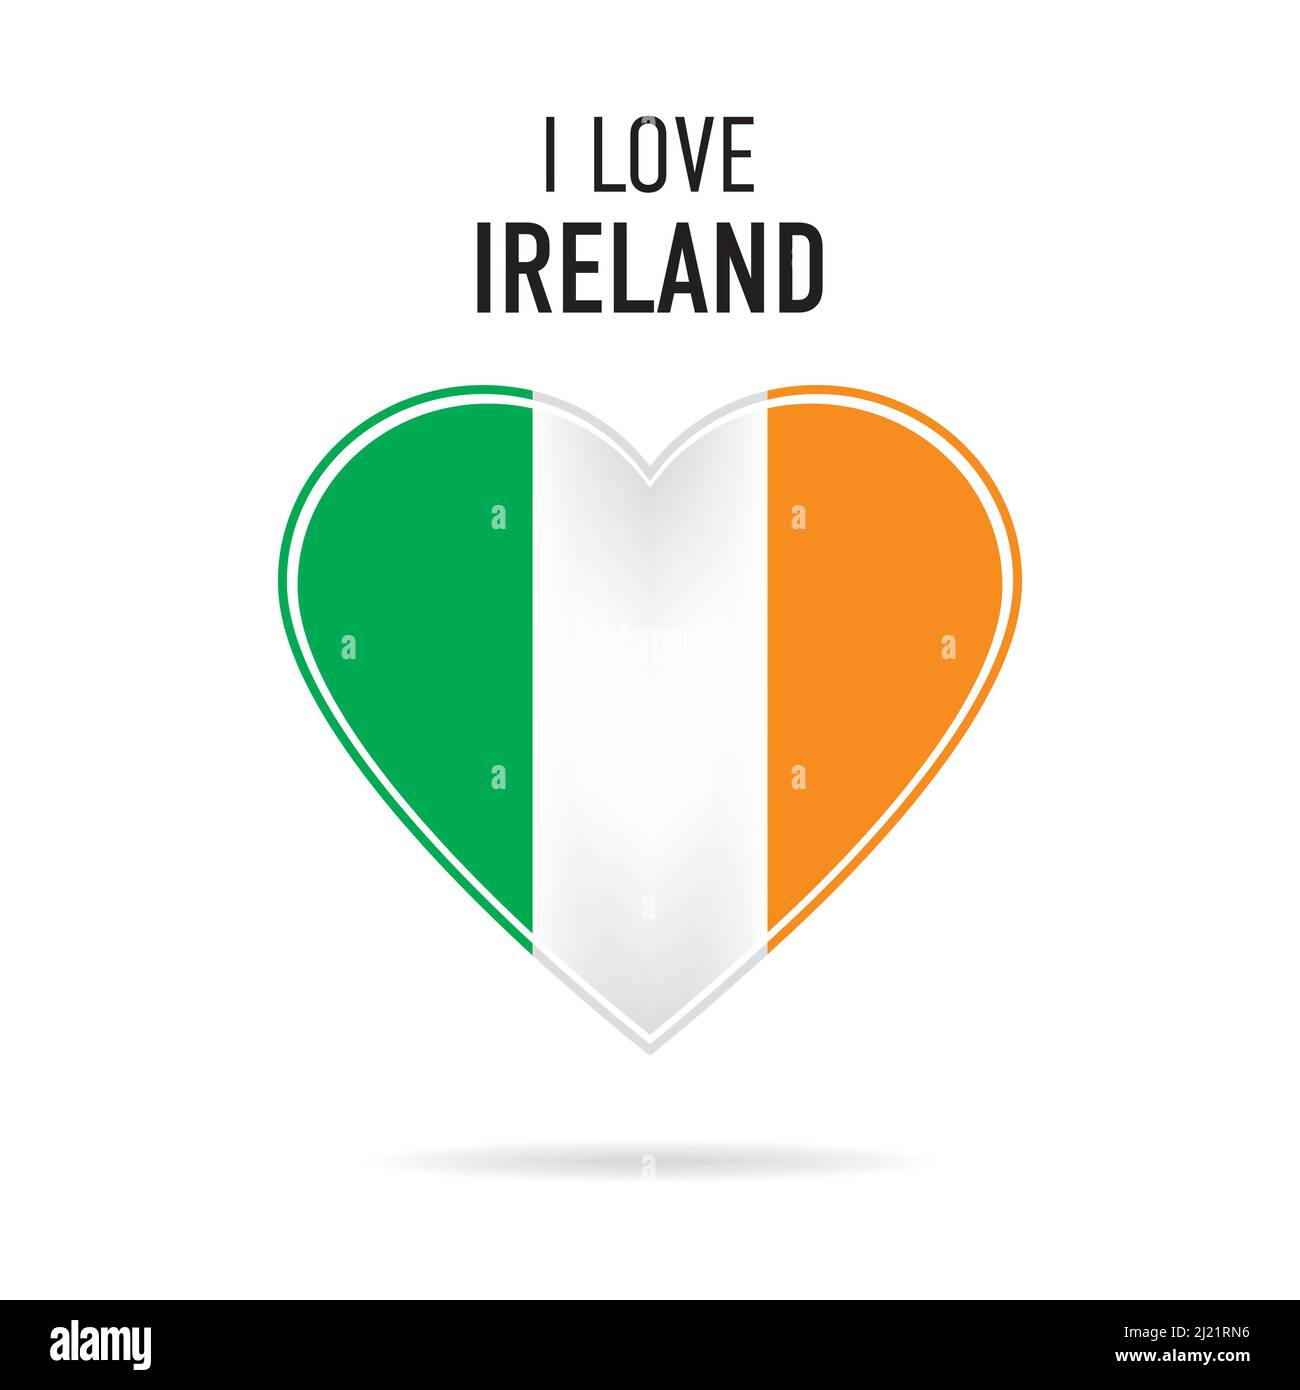 I love Ireland - Flag design und text isolated on a white background Stock Vector